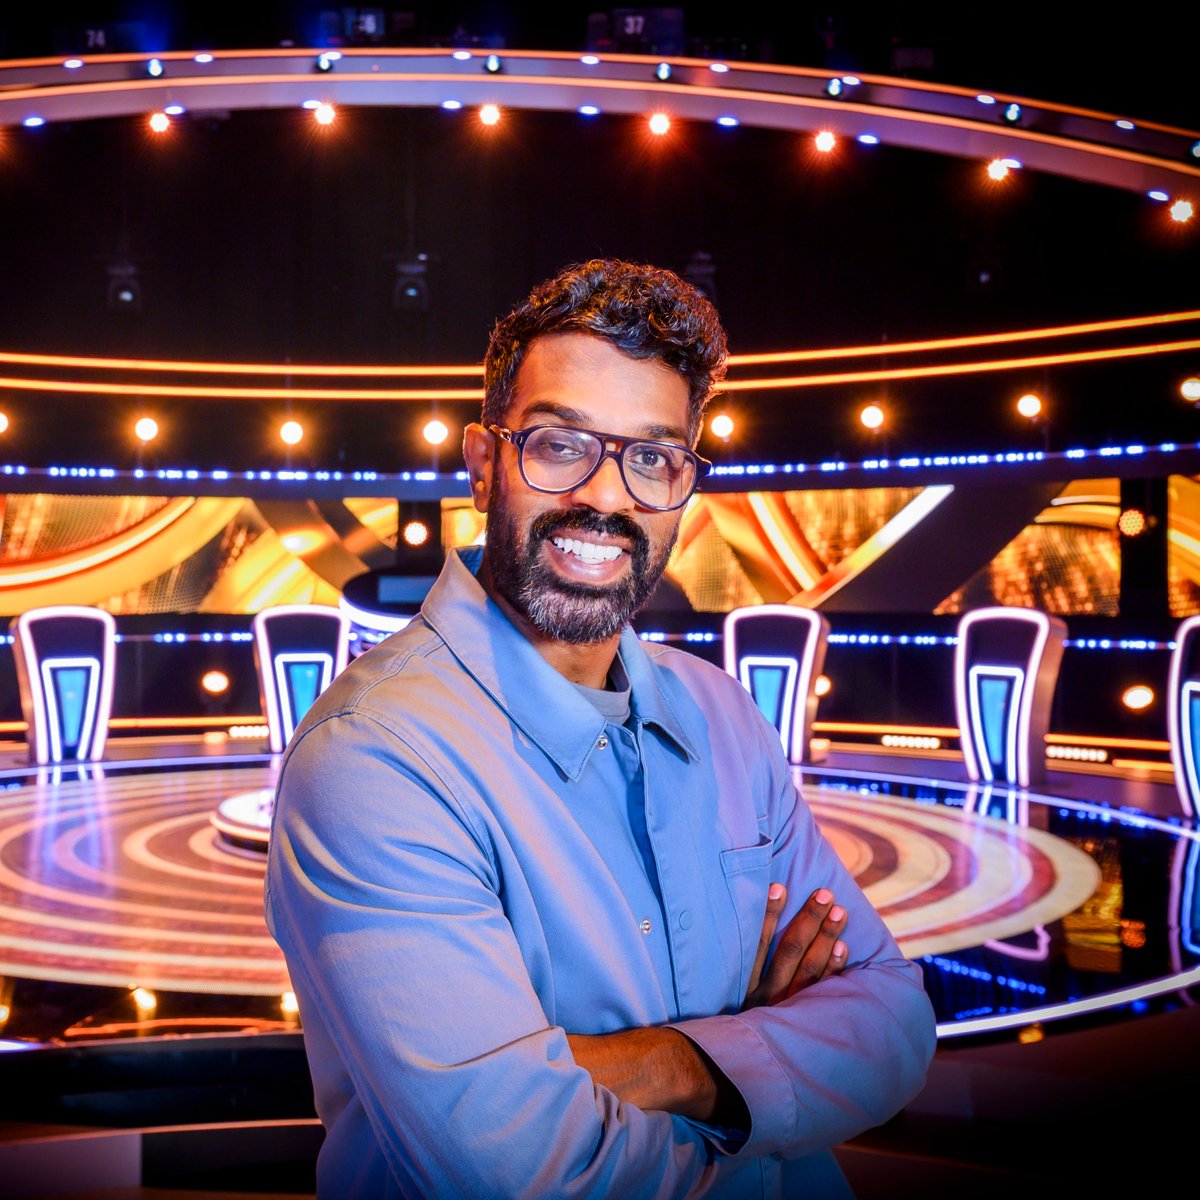 The Weakest Link will be back! Hosted by #RomeshRanganathan and made by @BBCStudios Entertainment Productions, the family favourite Saturday night quiz show, will return to @BBCOne and @BBCiPlayer later this year. Find out more ⤵️ bbc.co.uk/mediacentre/bb…